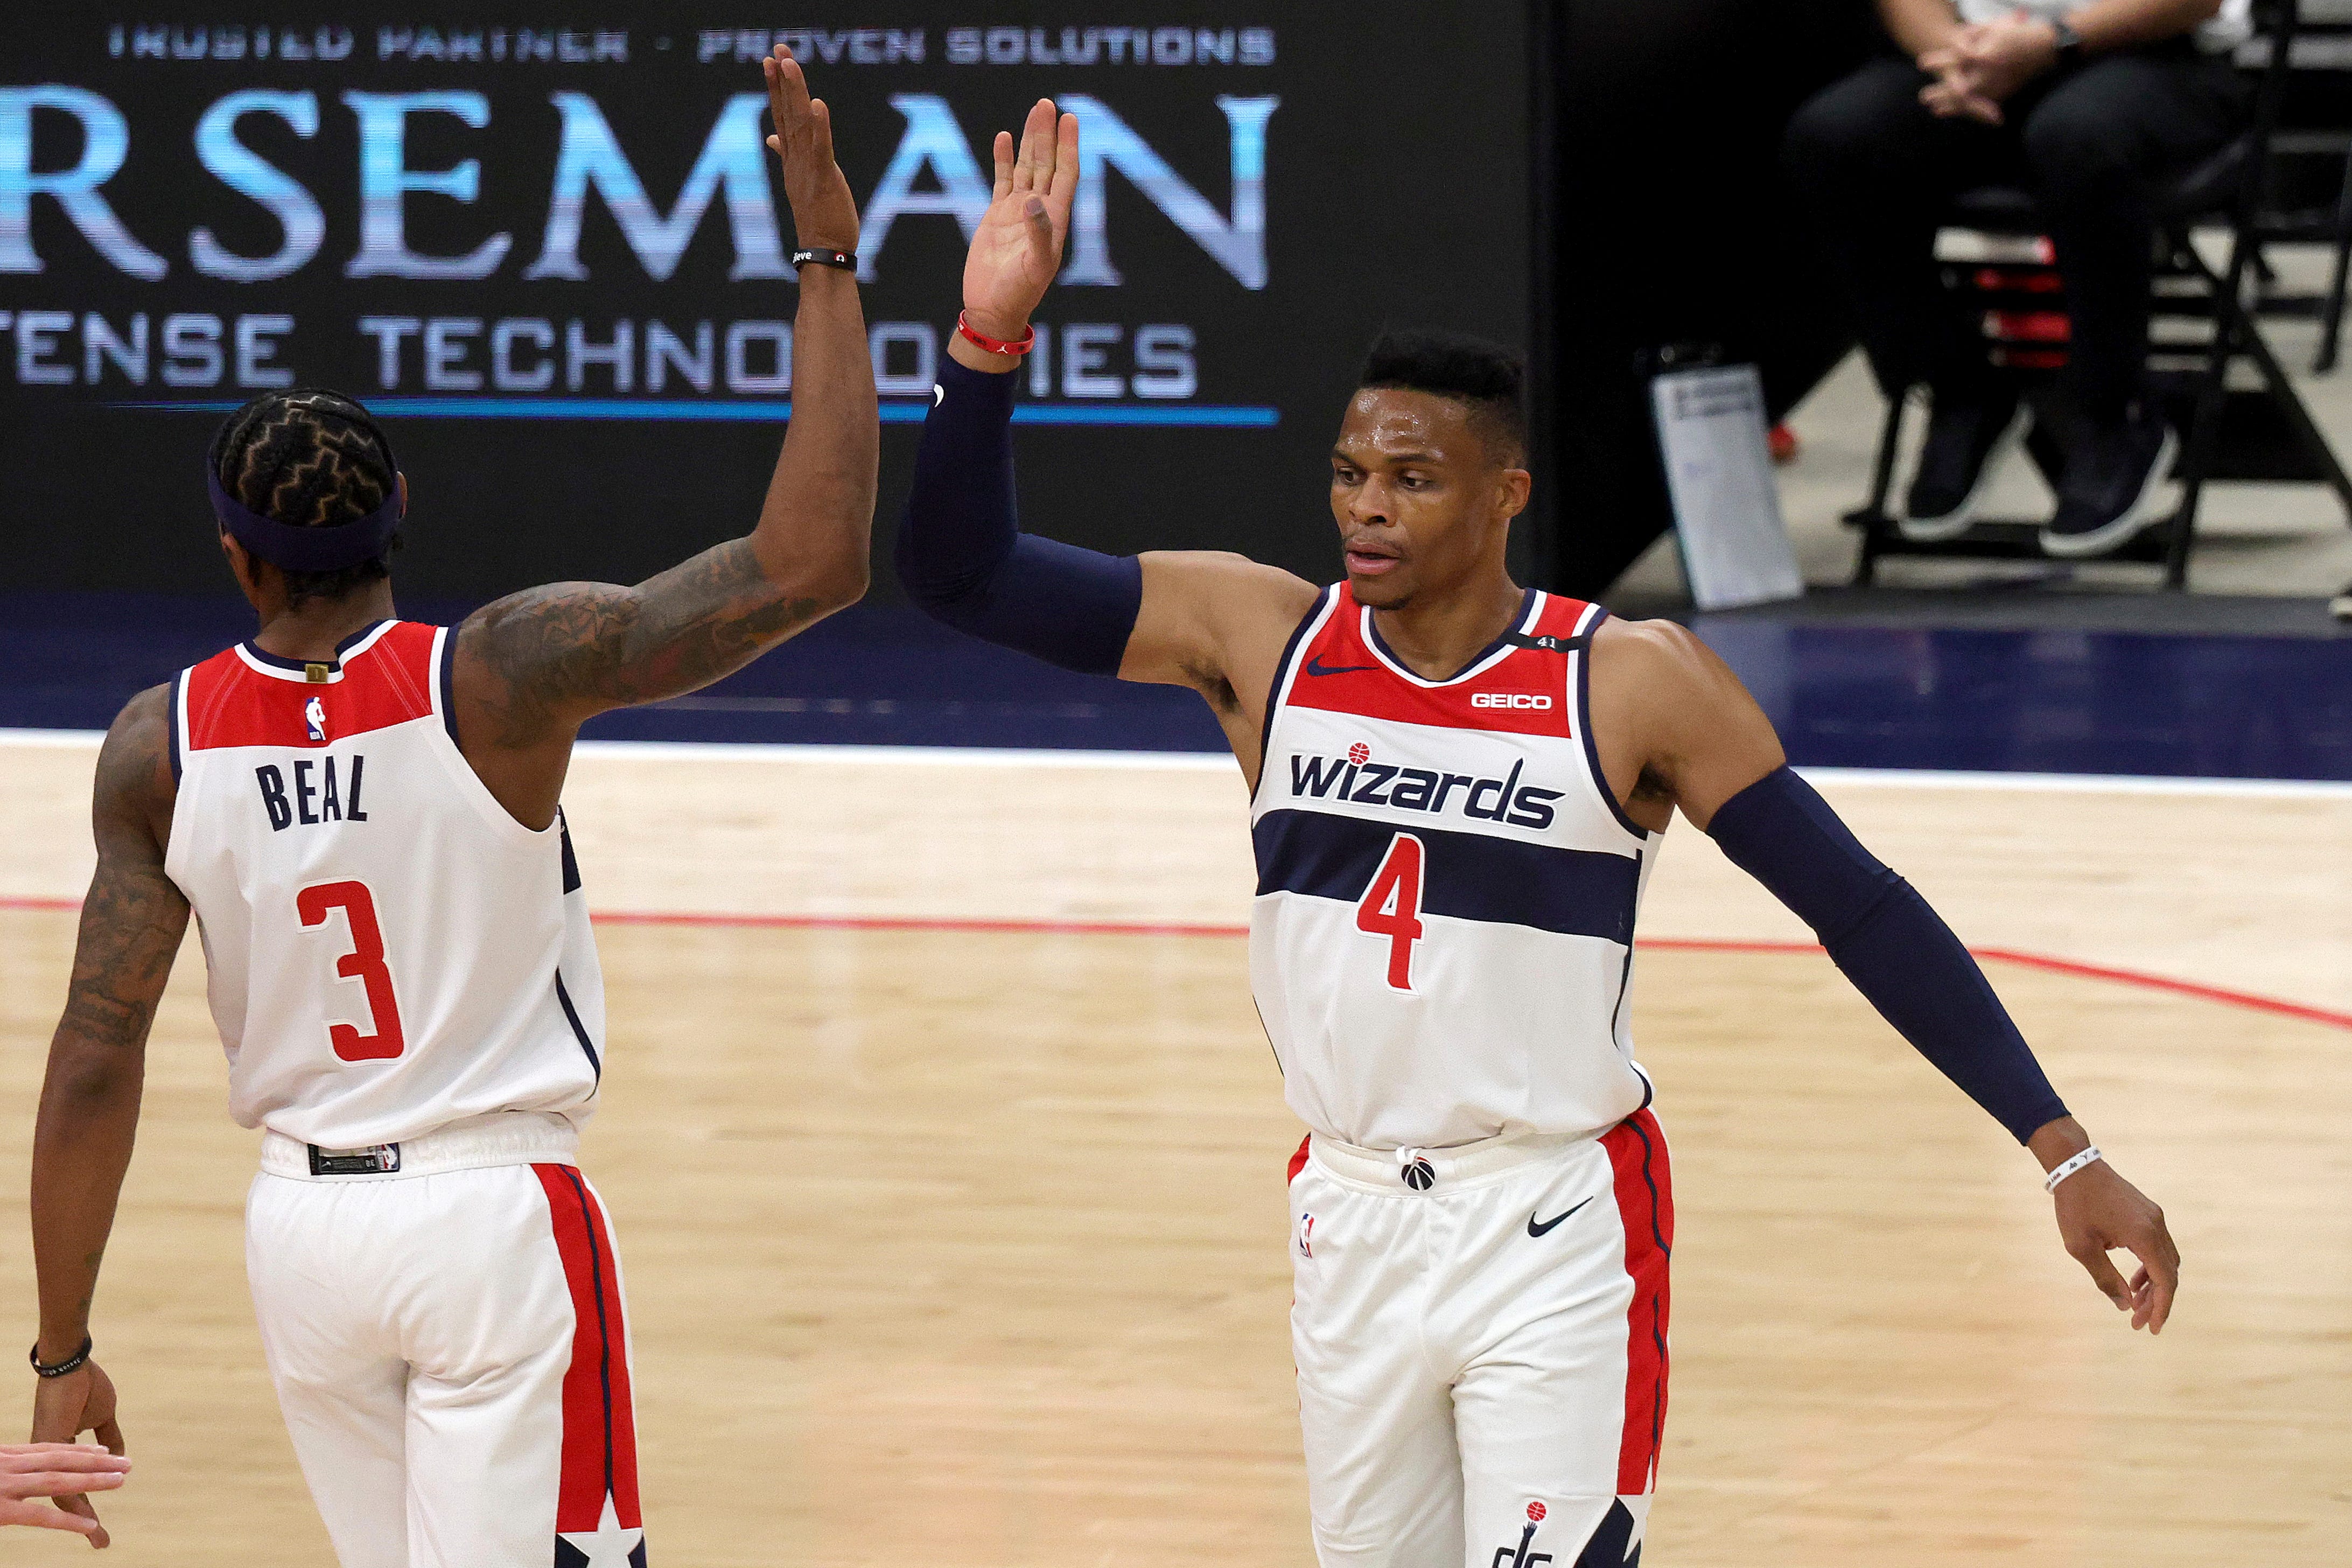 Washington Wizards Bradley Beal (3) and Russell Westbrook (4) celebrate after Beal scored and was fouled during the first half.